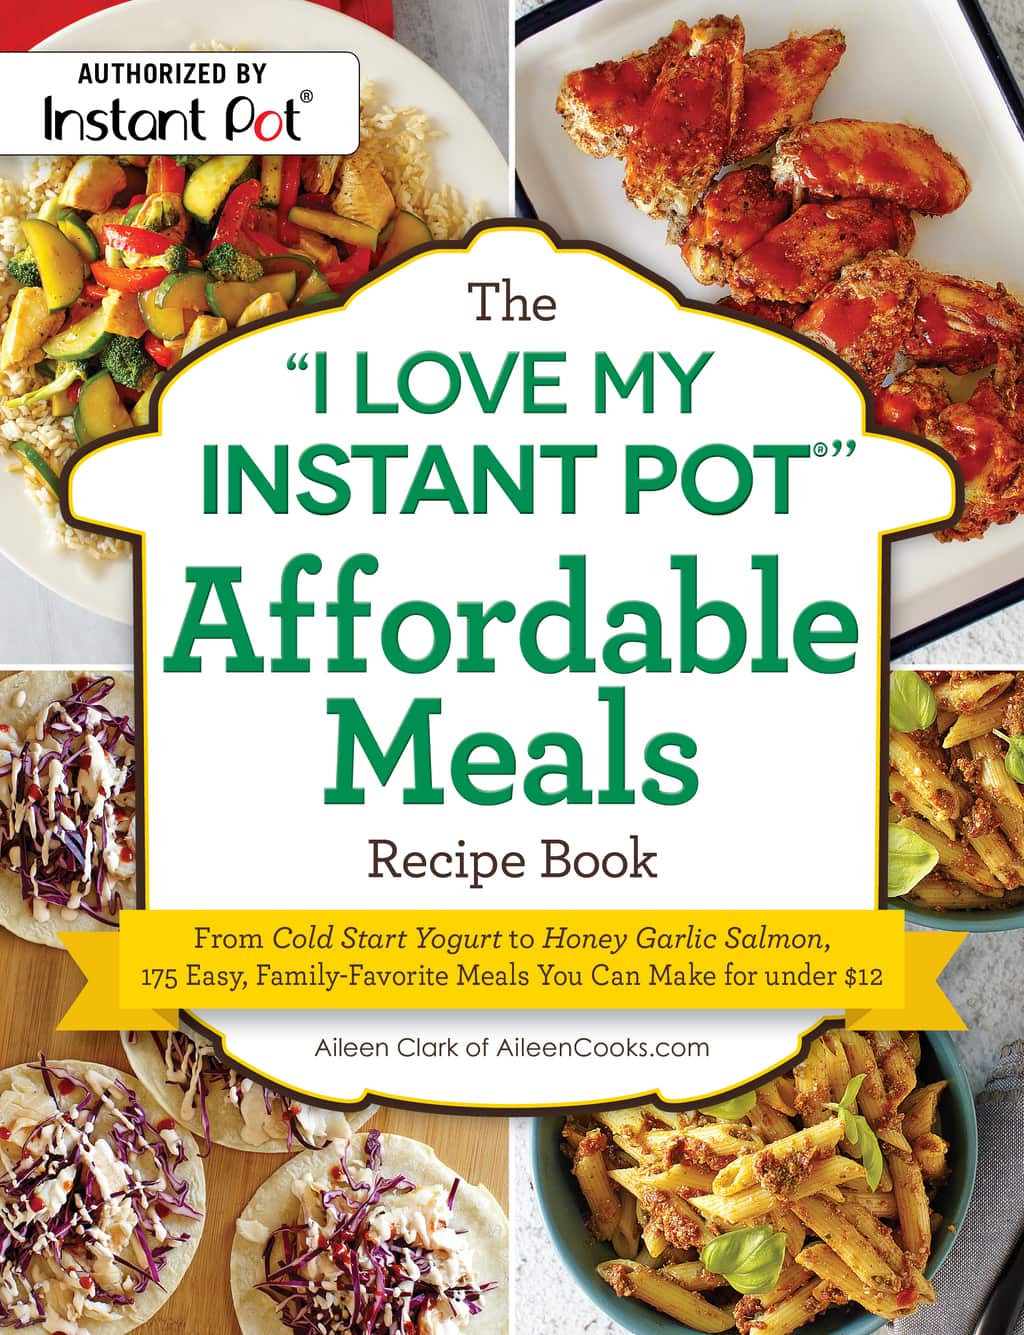 Front cover of The "I Love My Instant Pot" Affordable Meals Recipe Book.